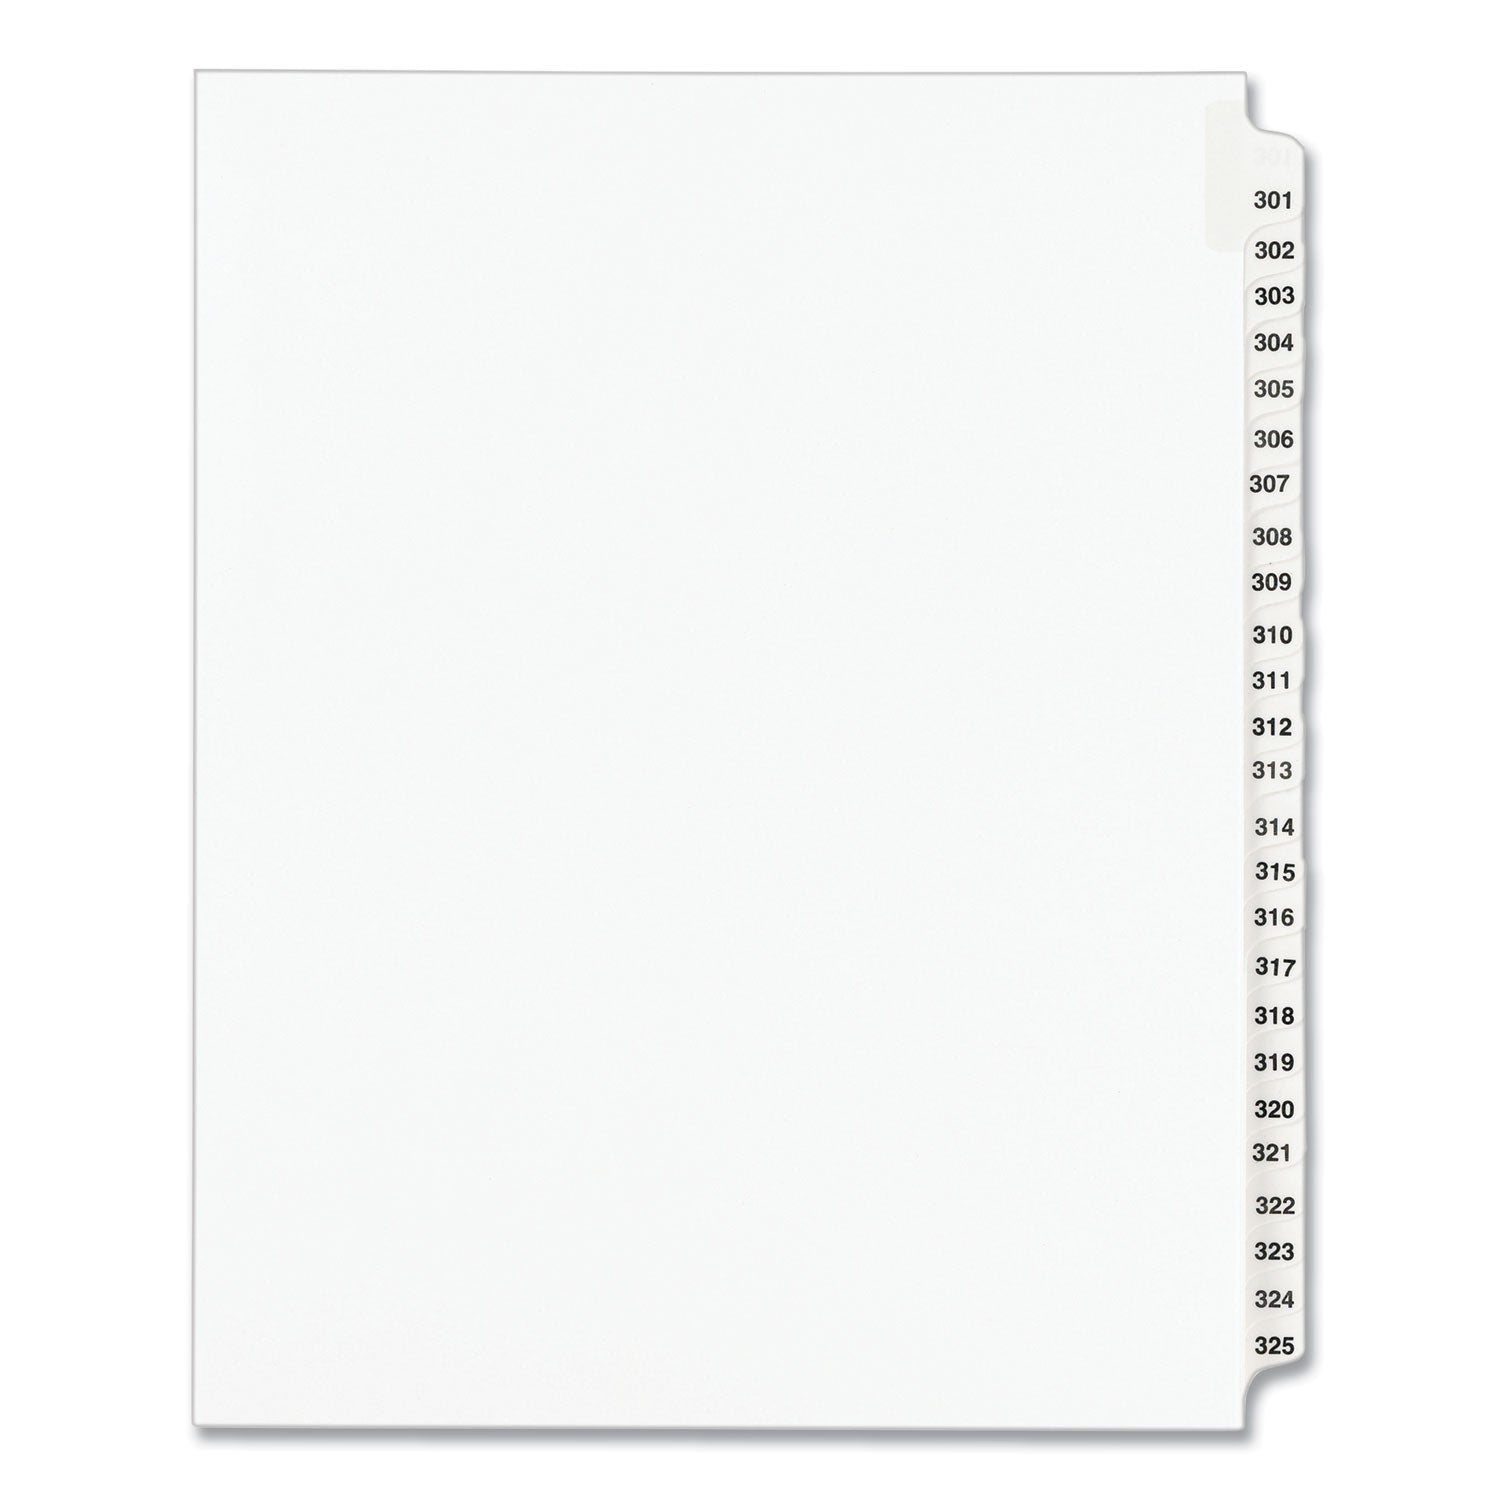 Preprinted Legal Exhibit Side Tab Index Dividers, Avery Style, 25-Tab, 301 to 325, 11 x 8.5, White, 1 Set, (1342) - 